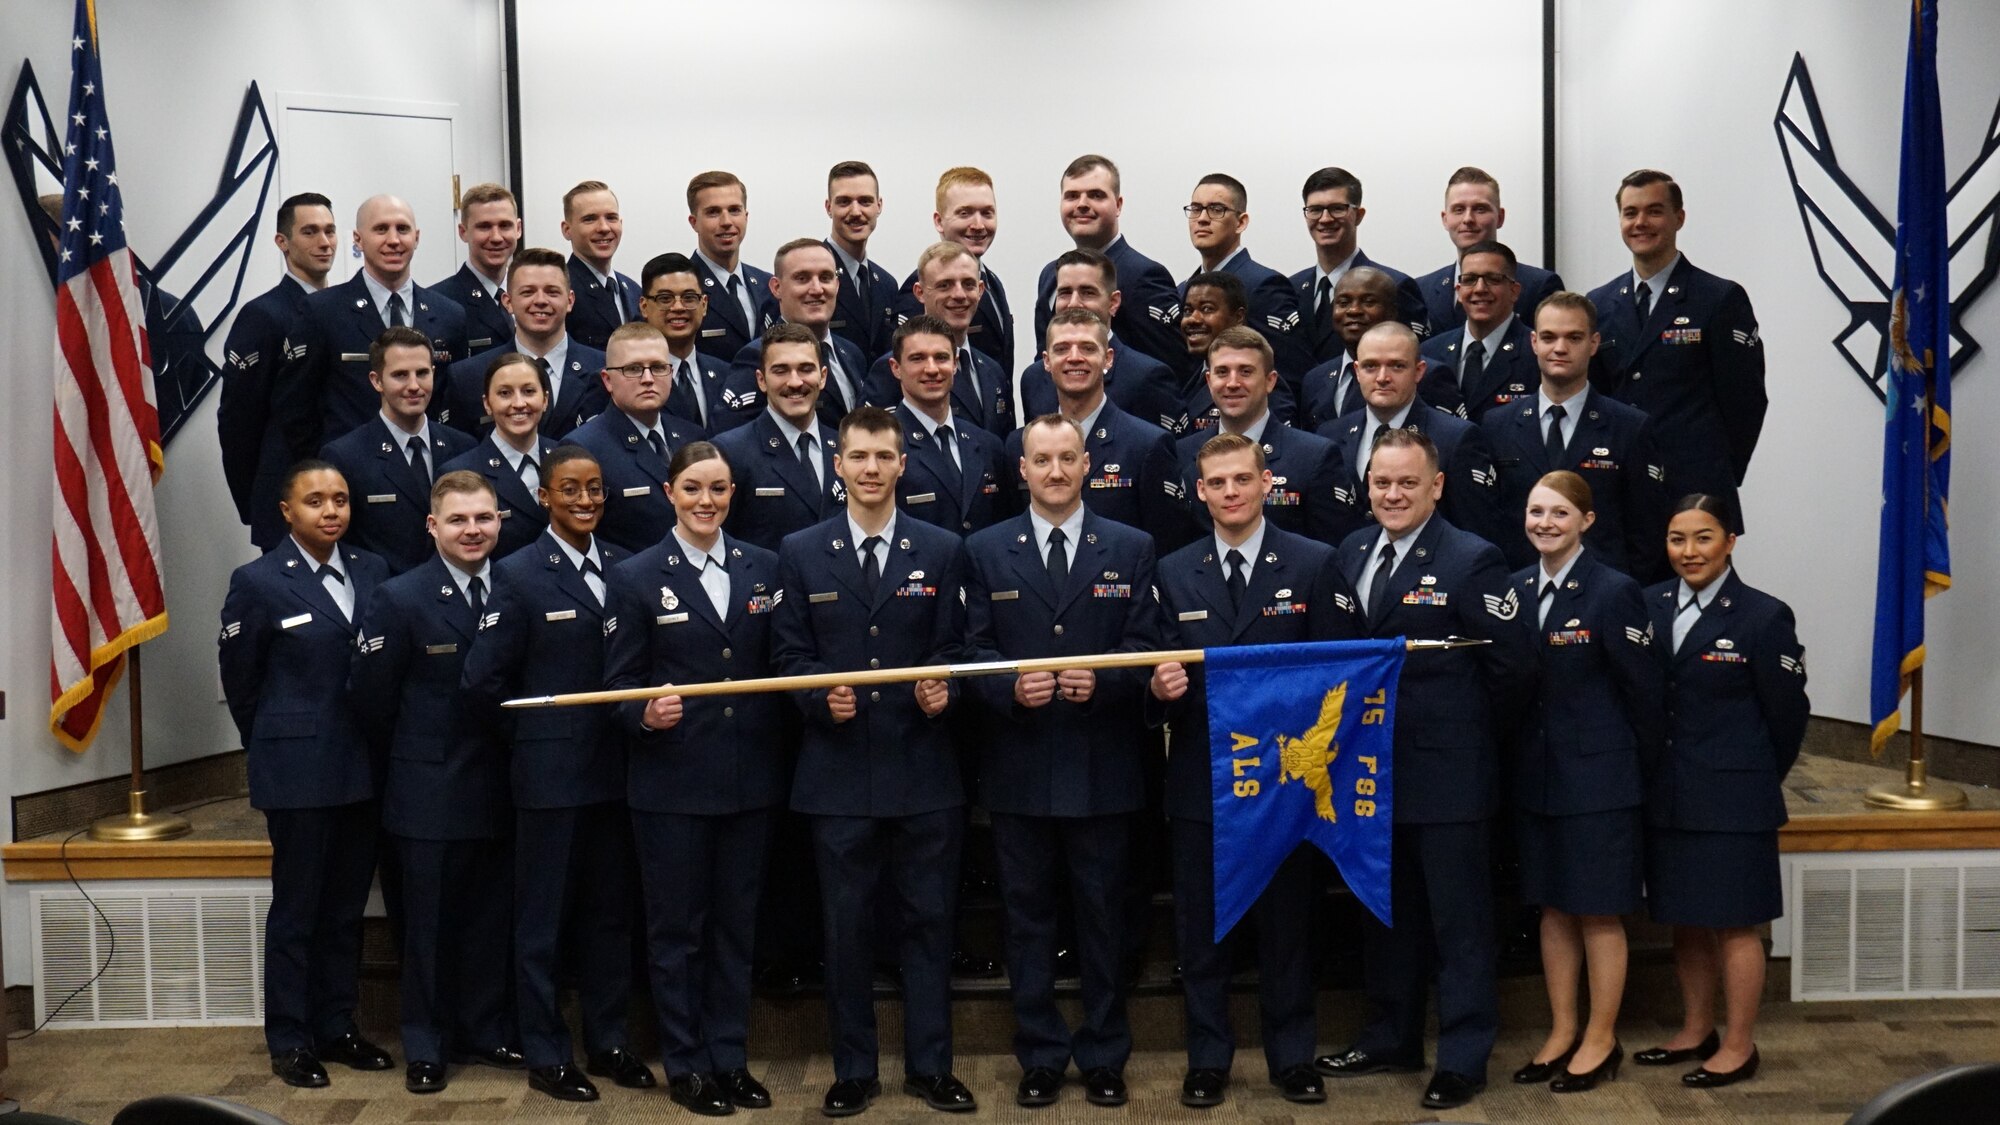 The graduates of Airman Leadership Class 20-B pose for a group photo.